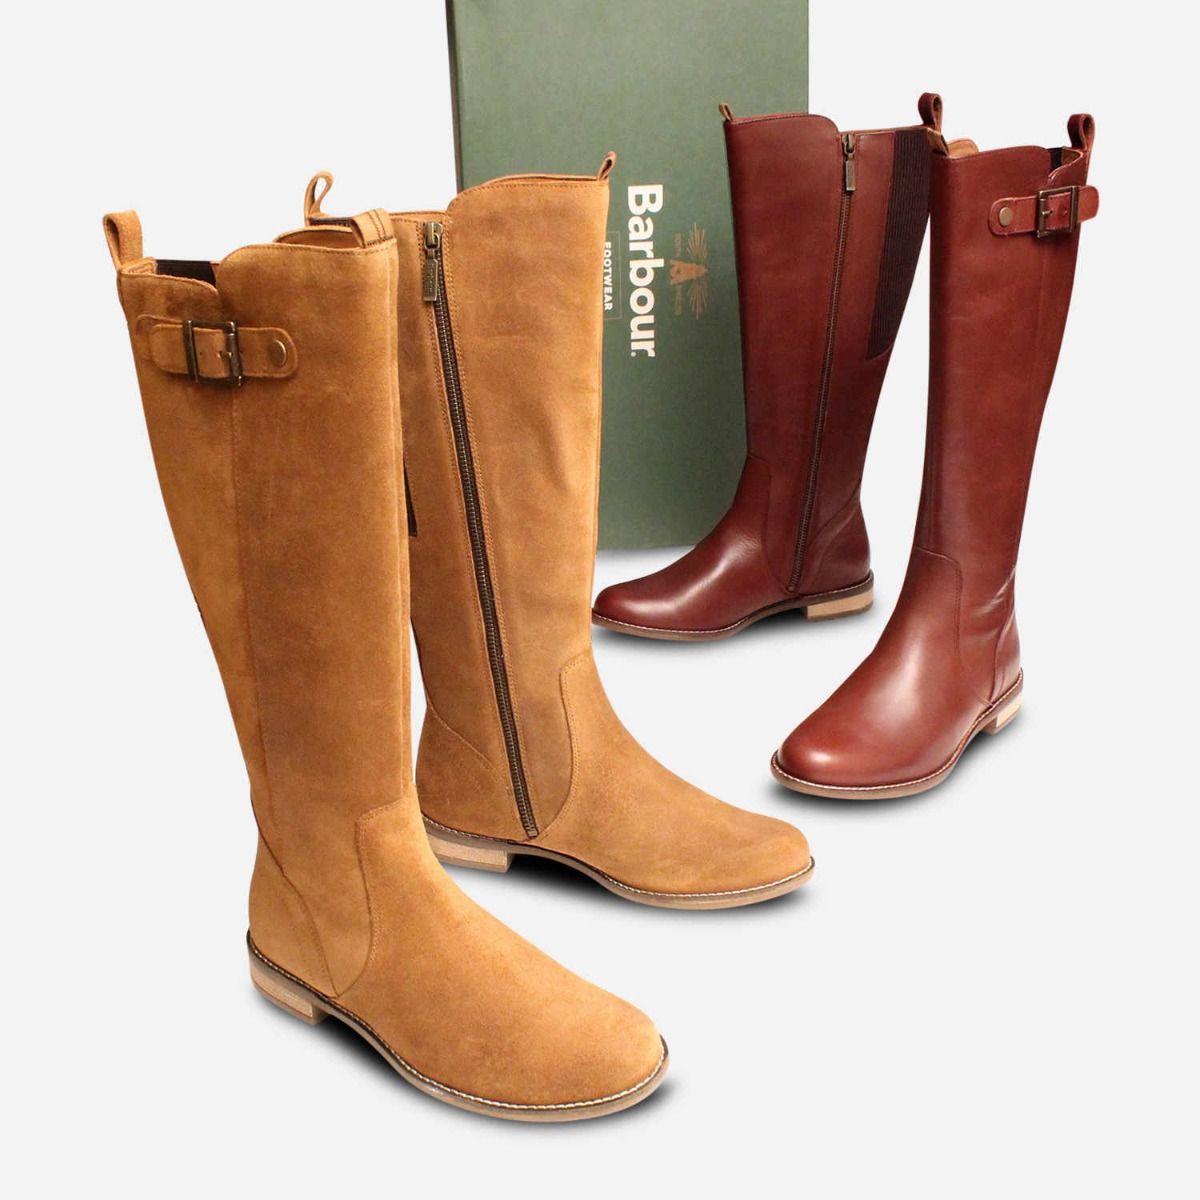 Barbour Knee High Boots in Bordeaux 